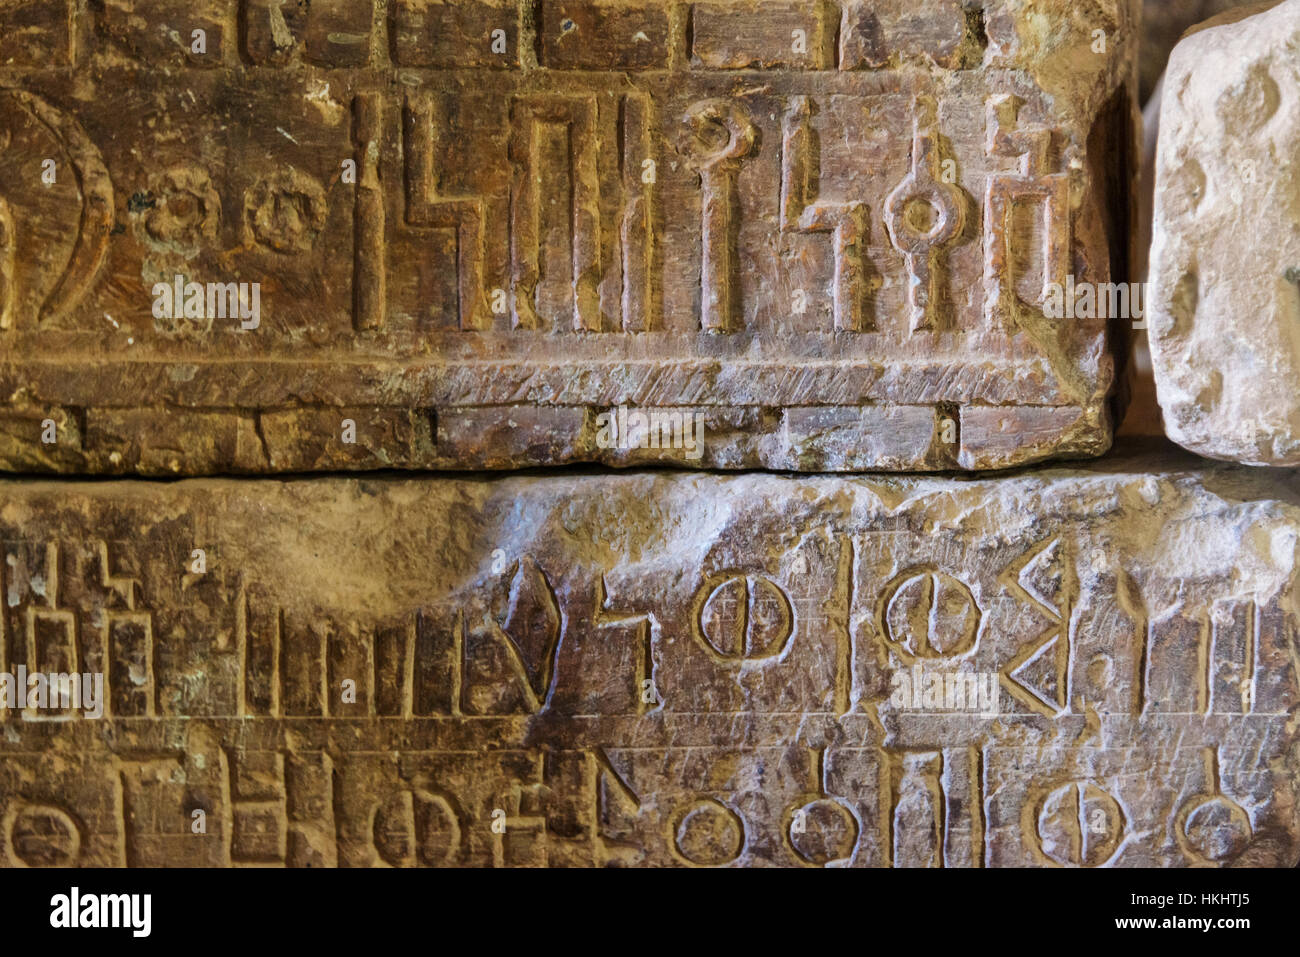 Stone with ancient carving in the Great Temple of Yeha, Ethiopia Stock Photo